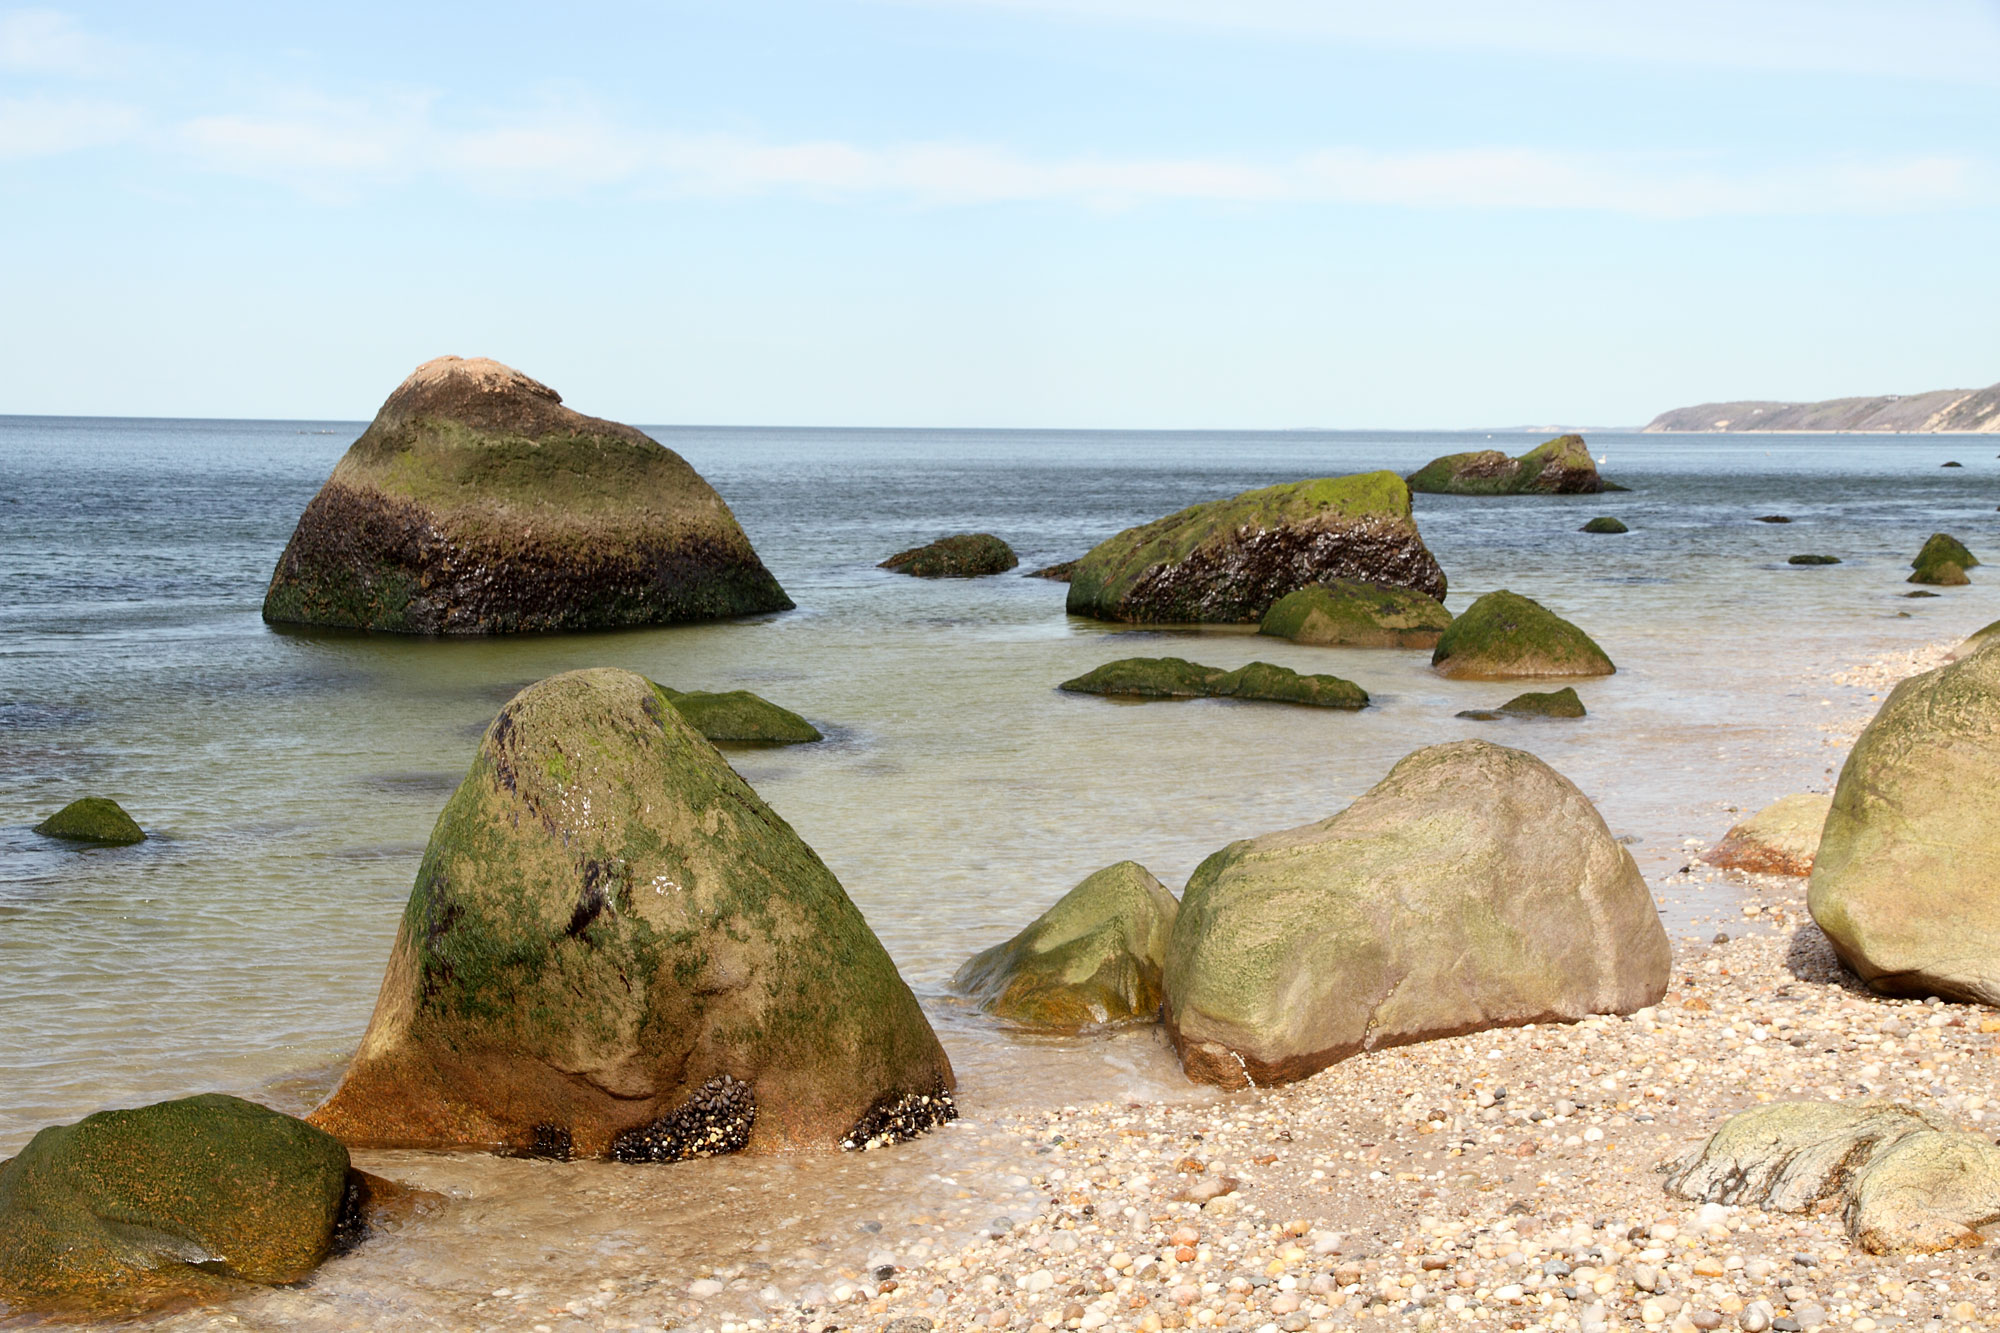 Photograph of glacial erratics on the shore of Long Island in New York. The photo shows large boulders scattered on a beach and in shallow water.